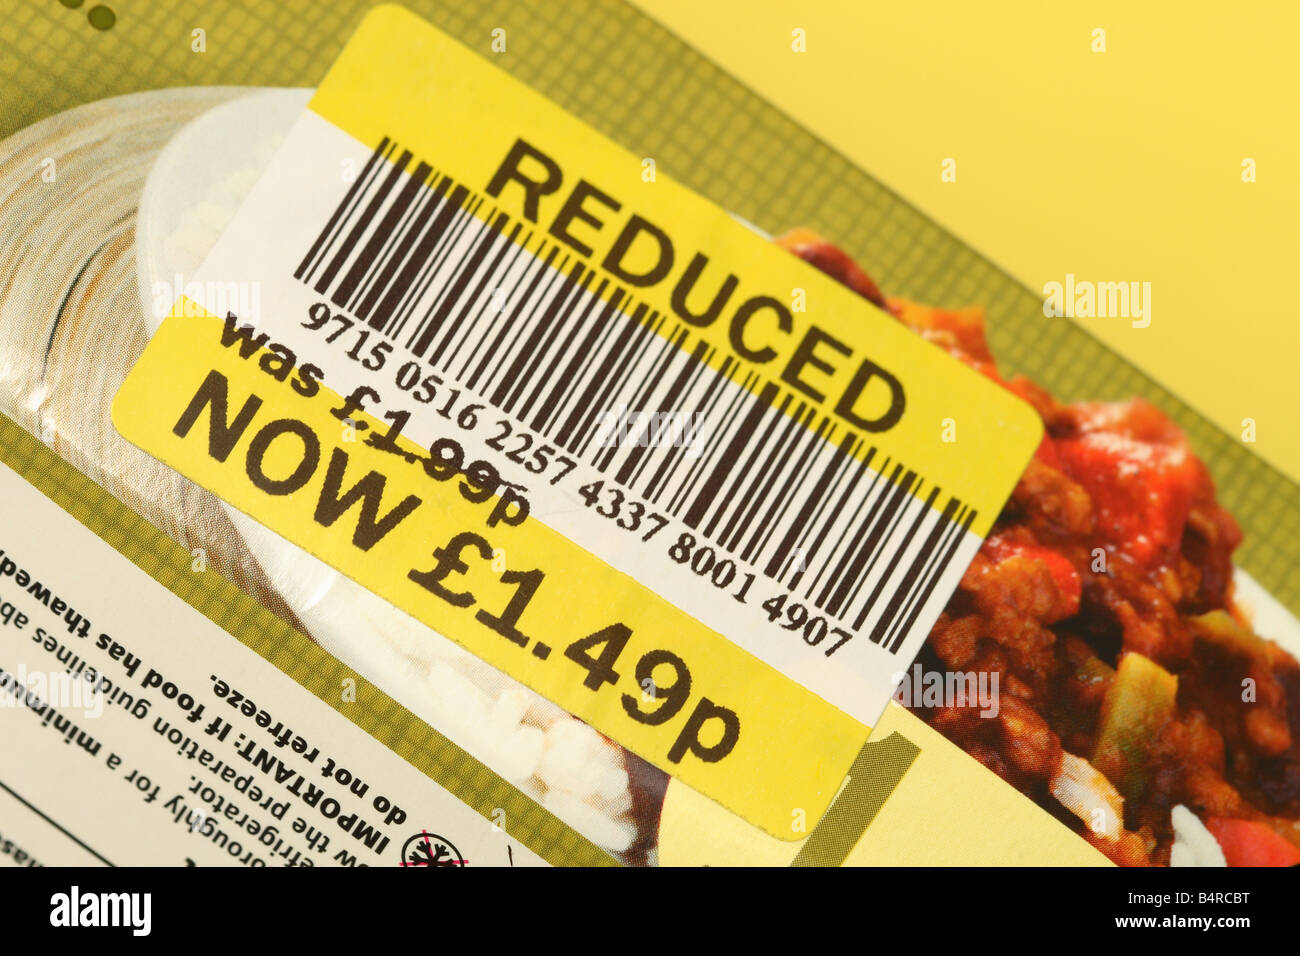 Reduced price food sticker label on supermarket ready meal bargain Stock Photo